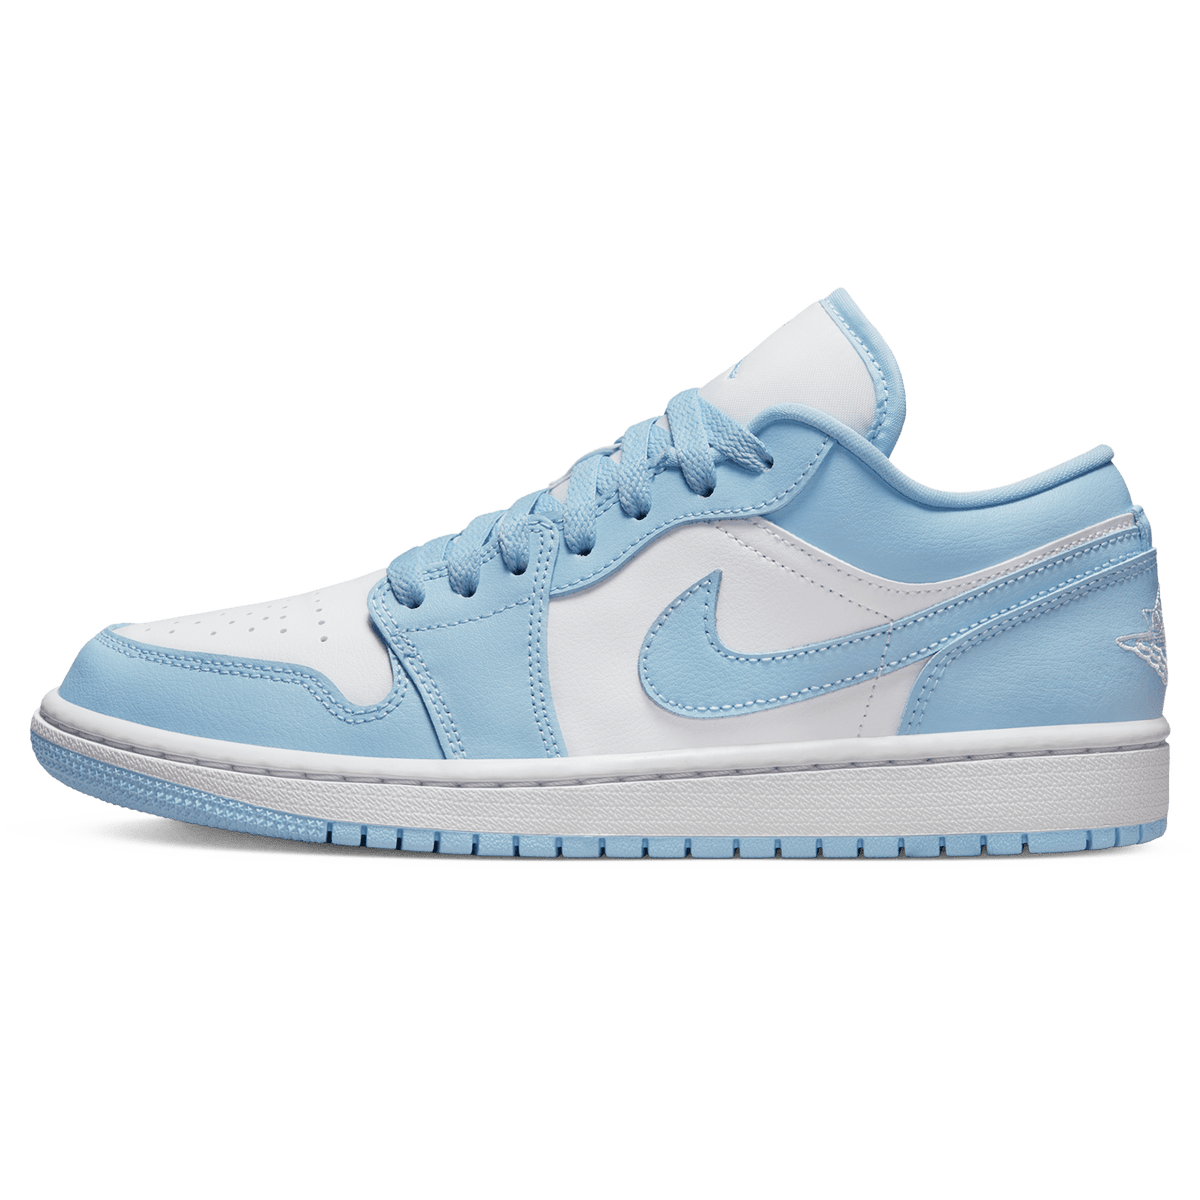 nike air make trail wind in florida free play Low Wmn 'Ice Blue - UrlfreezeShops